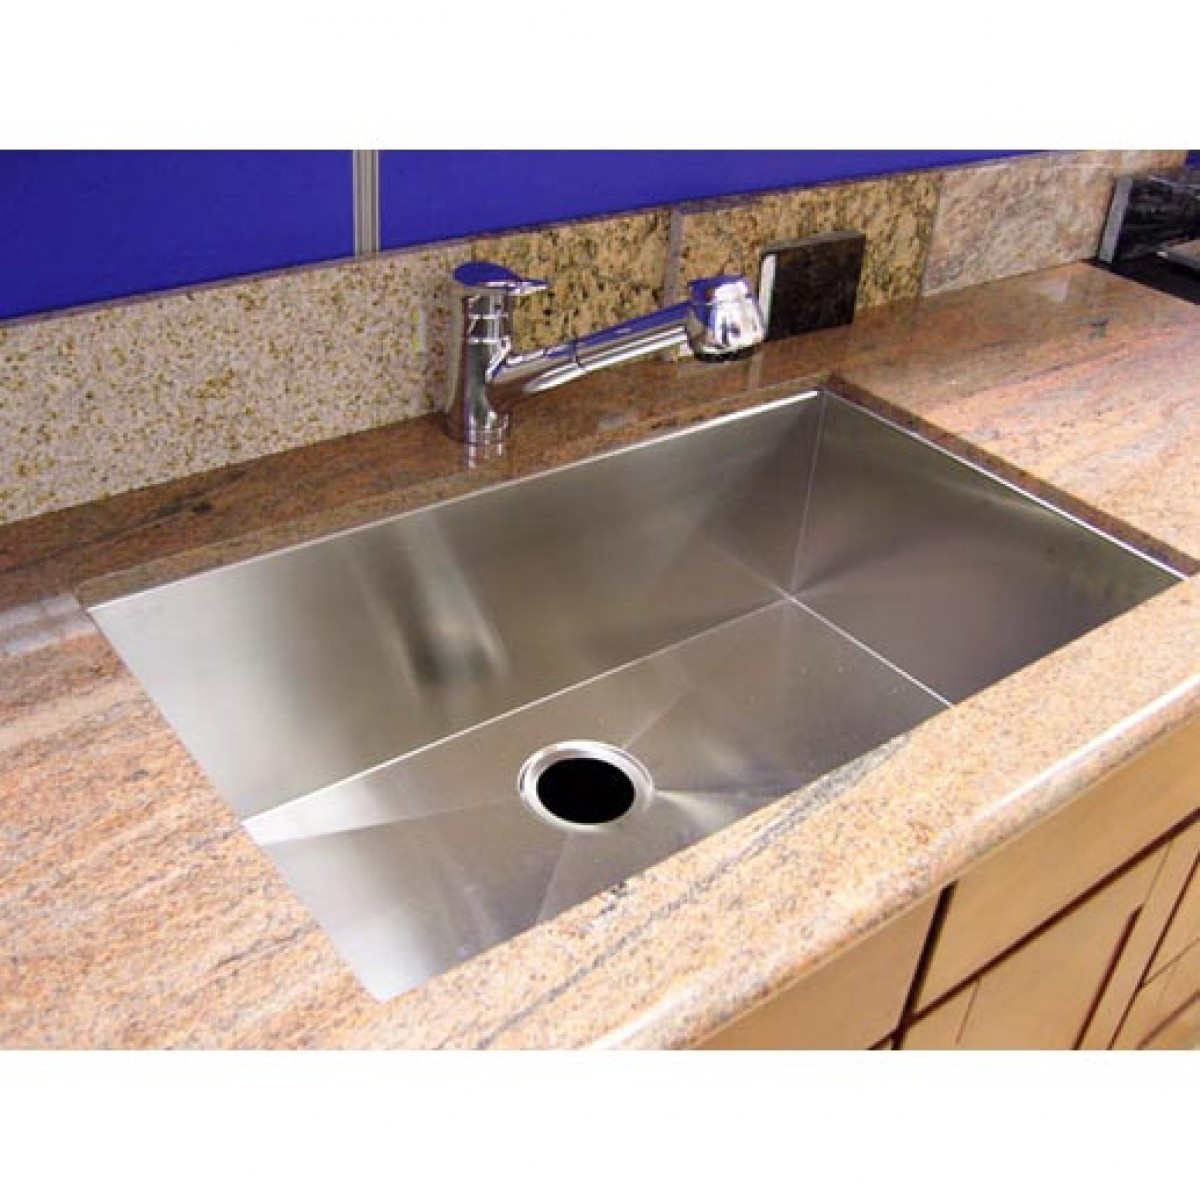 30 Inch Stainless Steel Undermount Single Bowl Kitchen Sink Zero Radius 30-inch Undermount Single Bowl Stainless Steel Kitchen Sink